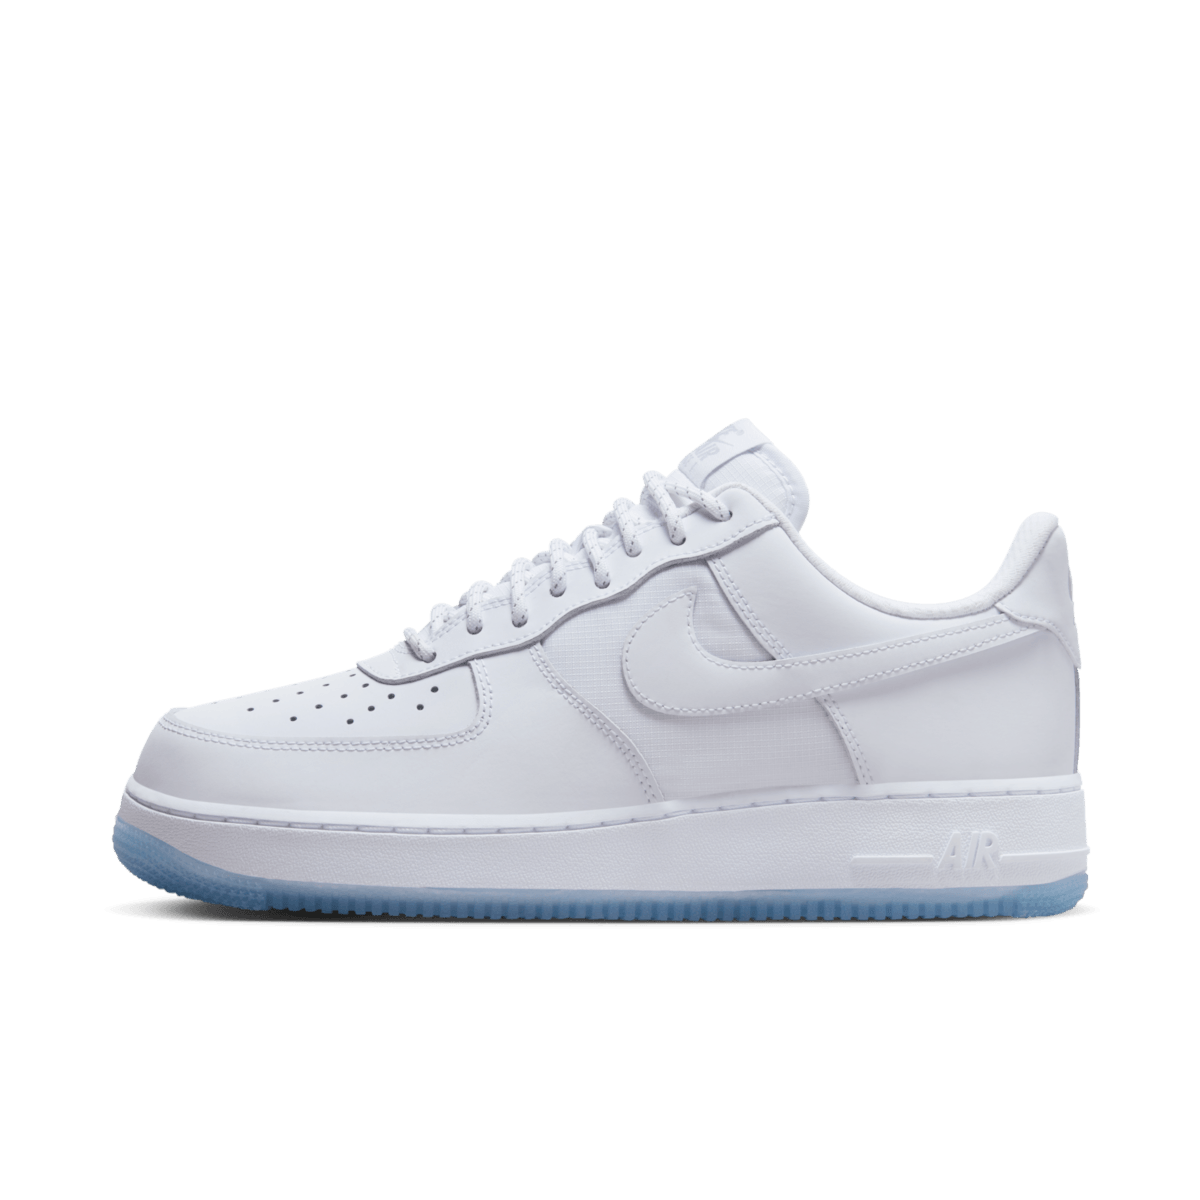 Nike Air Force 1 '07 'White Icy Blue' FV0383-100